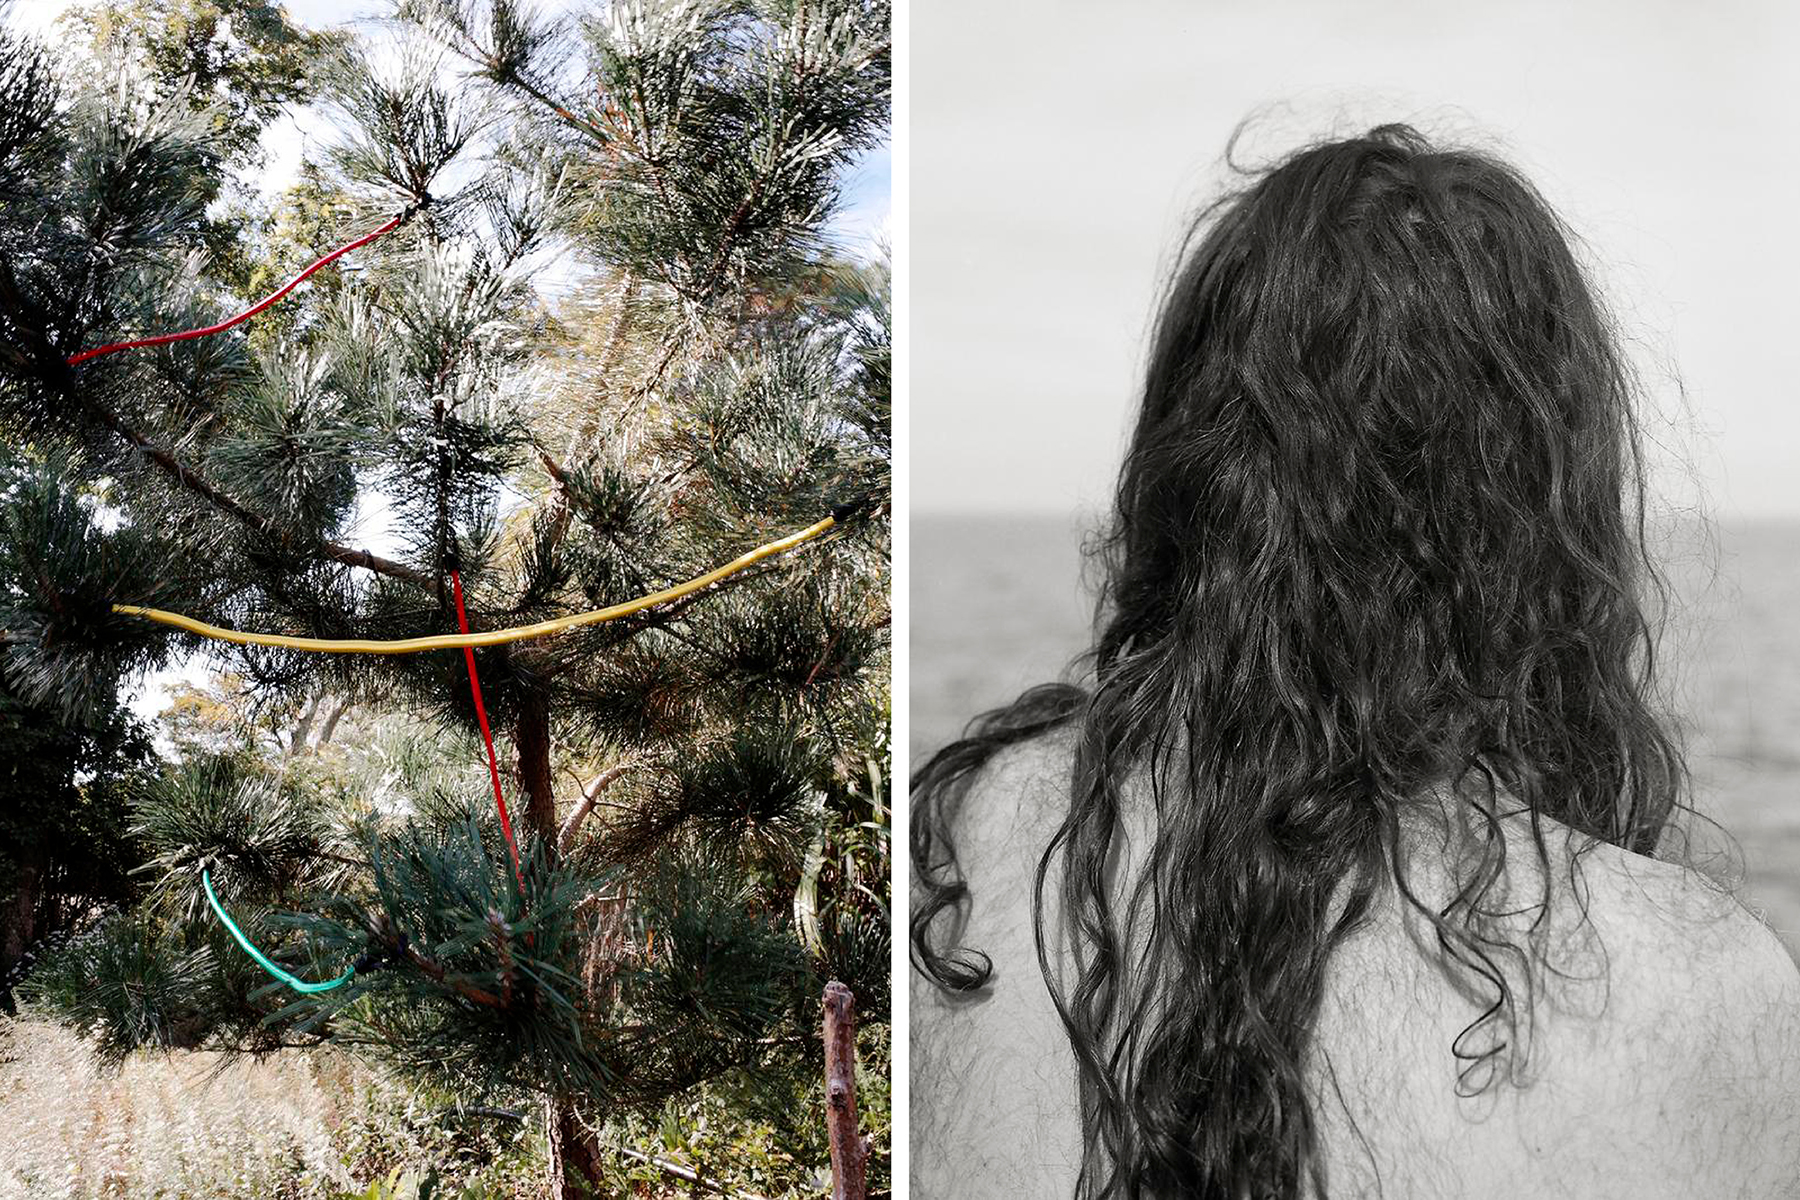 A diptych image of a web of colorful lines hanging from trees and a portrait of the back of a person looking out at a body of water.